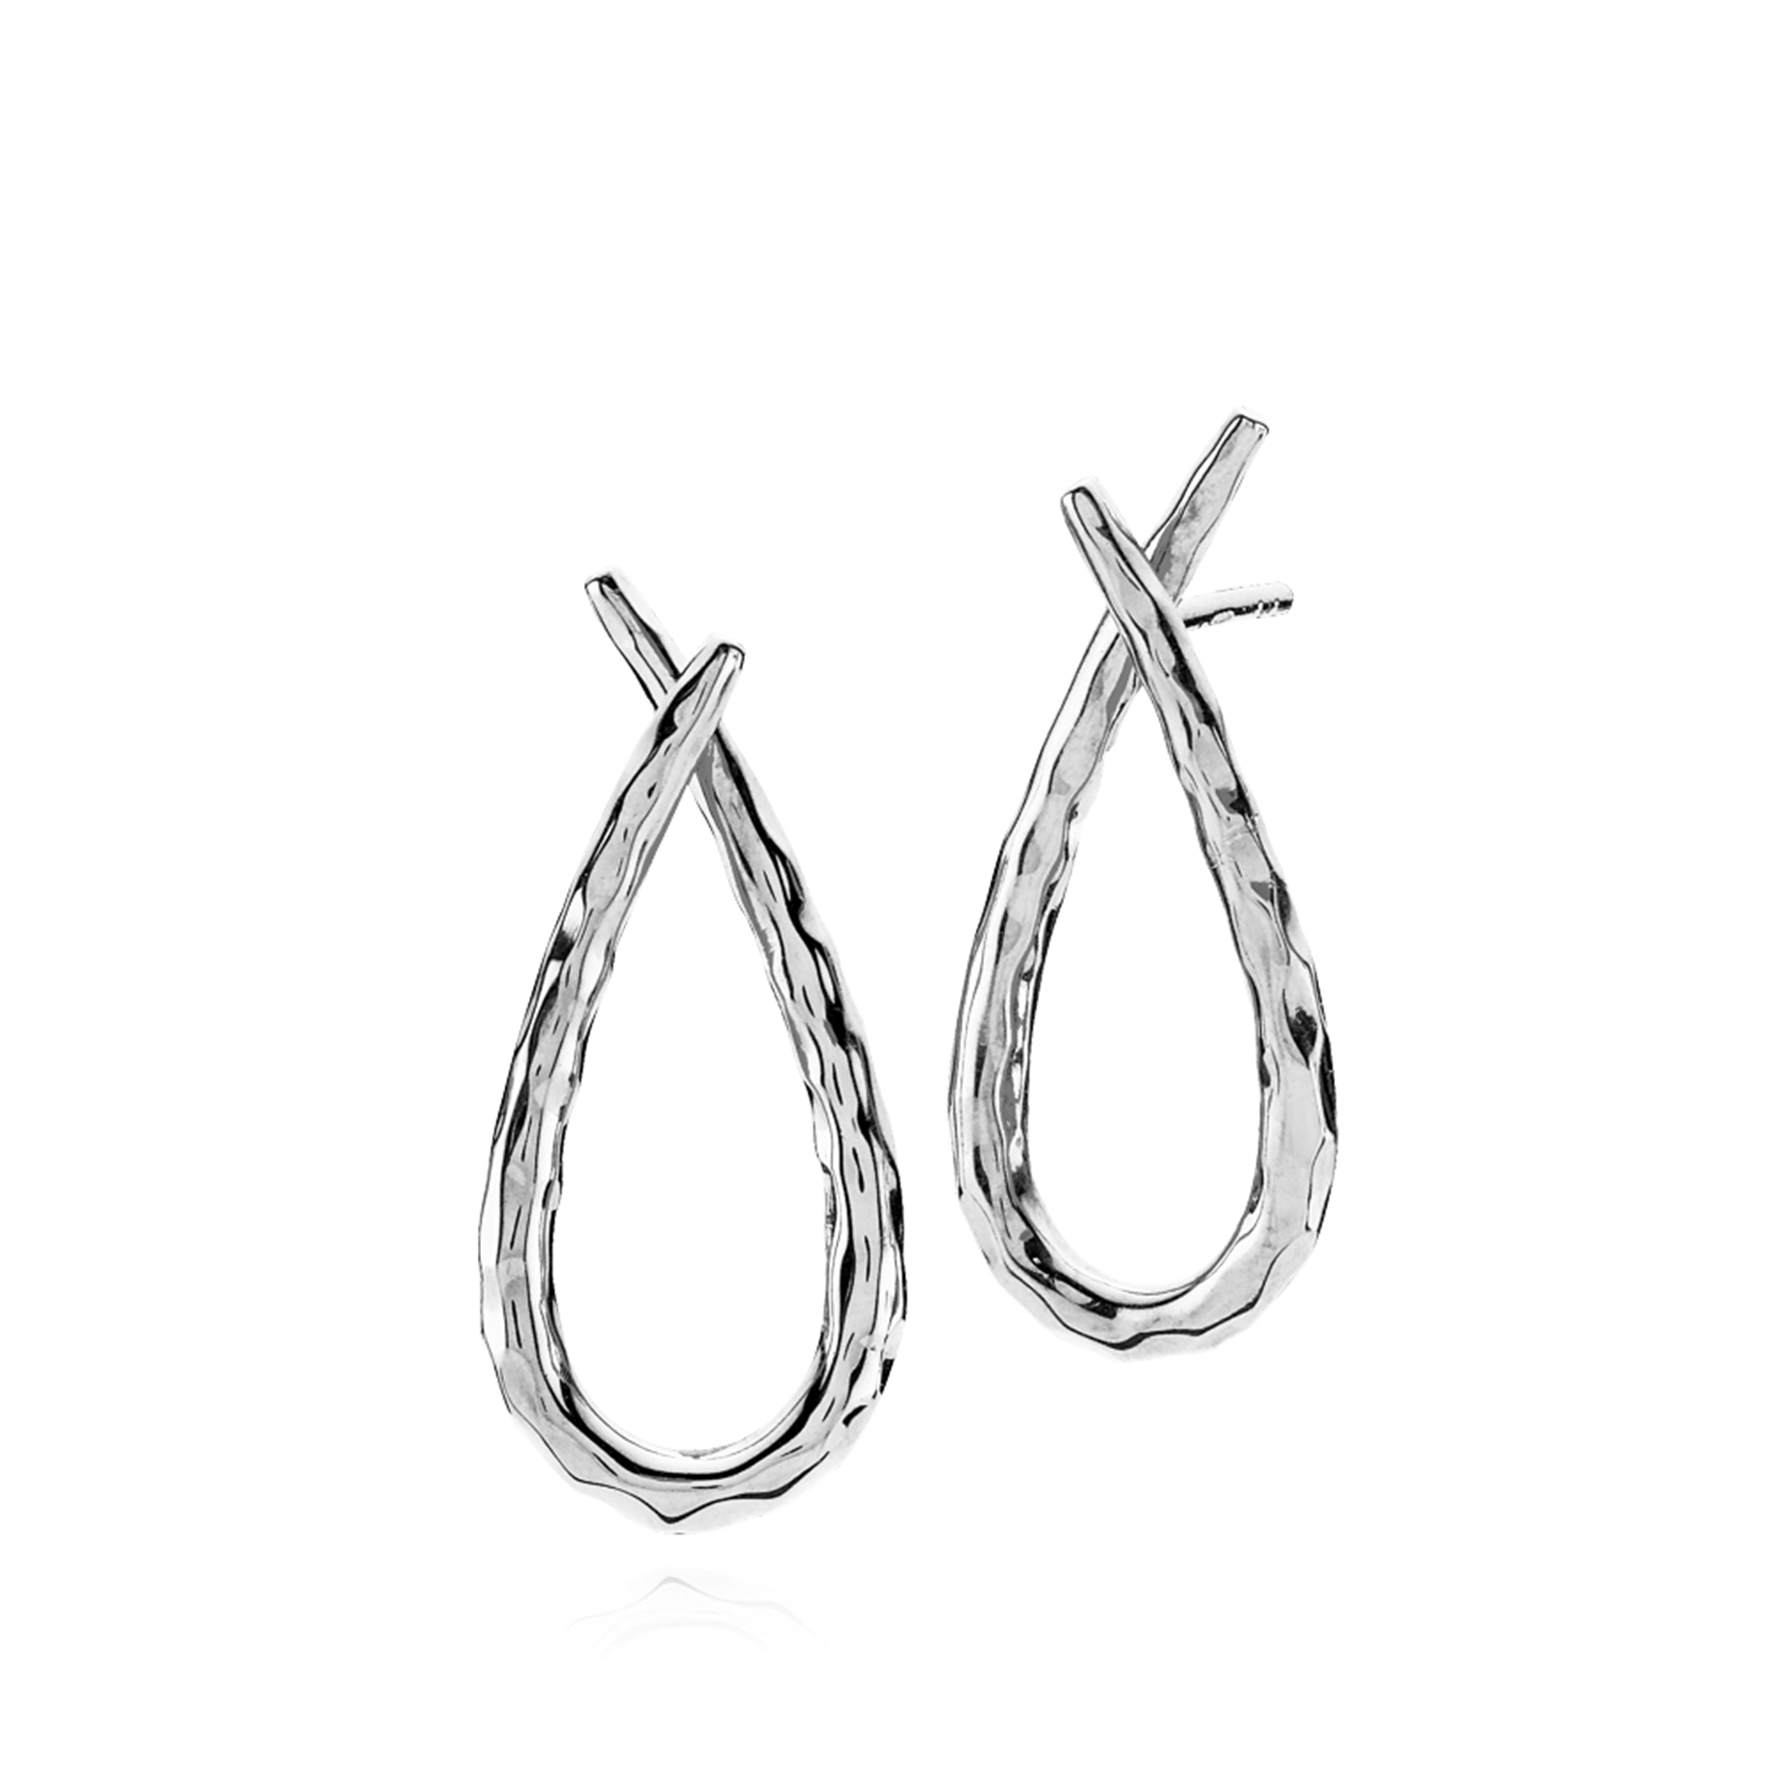 Attitude Hammered Earrings von Izabel Camille in Silber Sterling 925